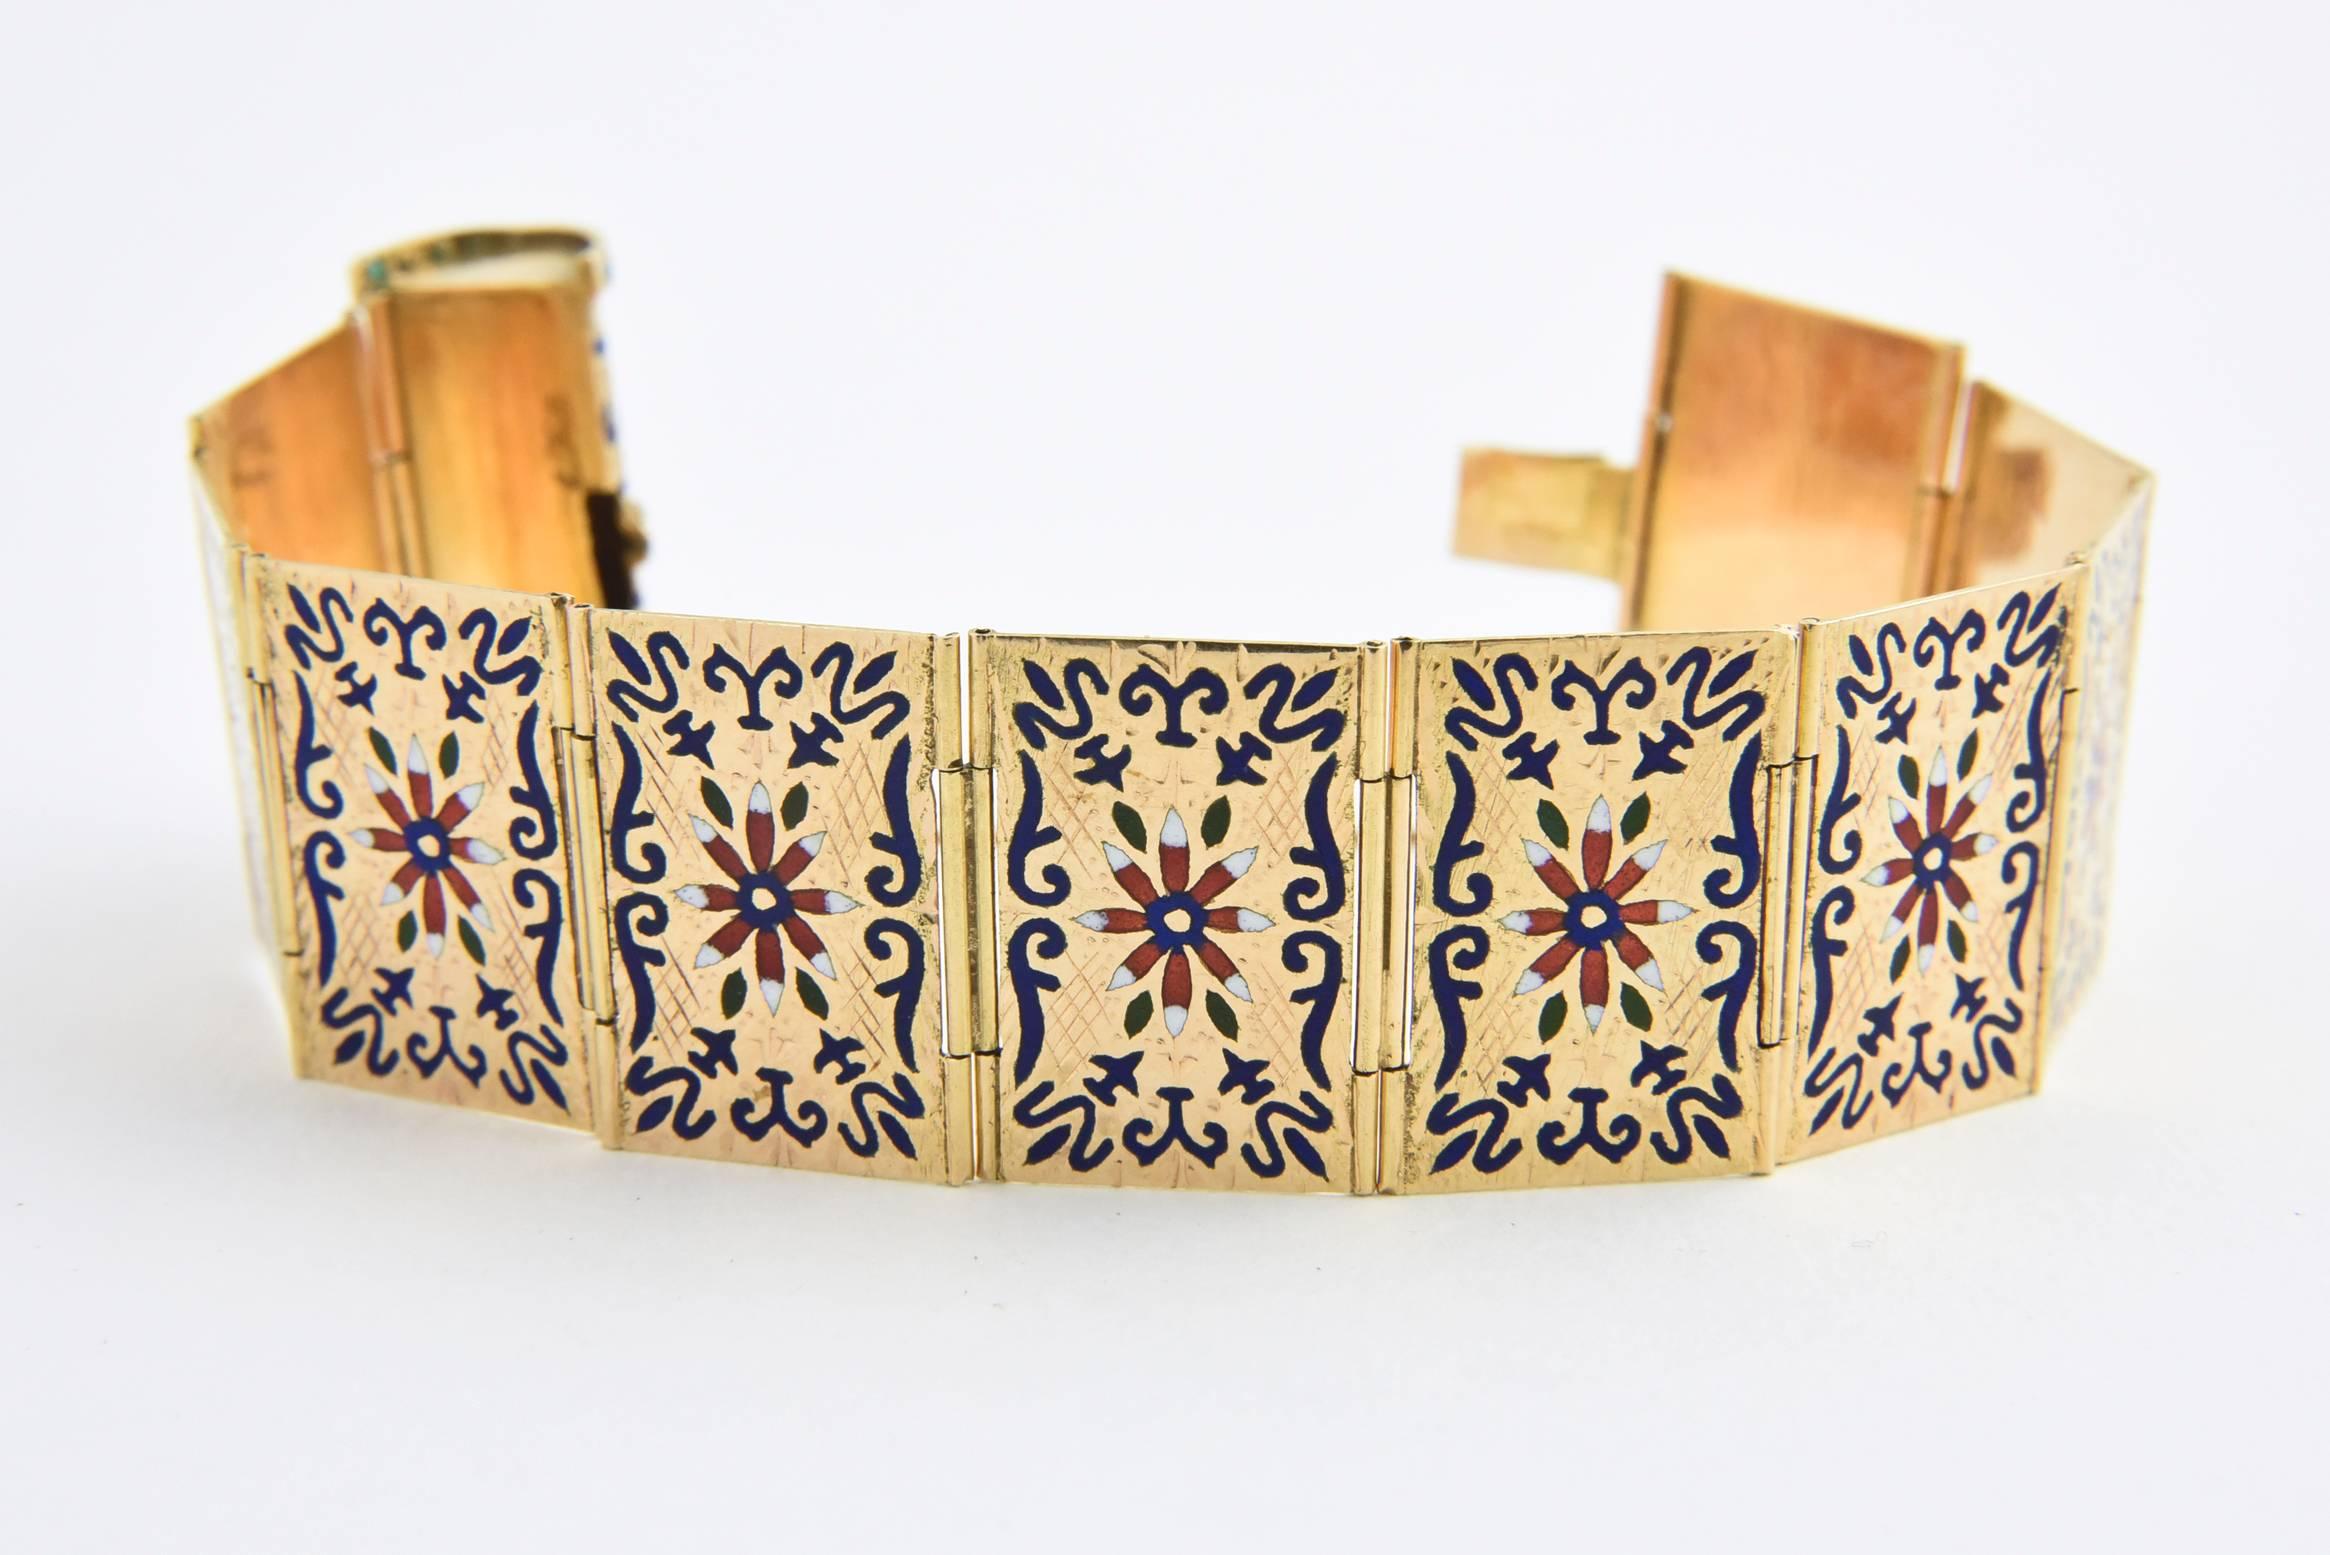 Early 20th Century Renaissance Revival Enameled and Jewelled Gold Book Bracelet 2